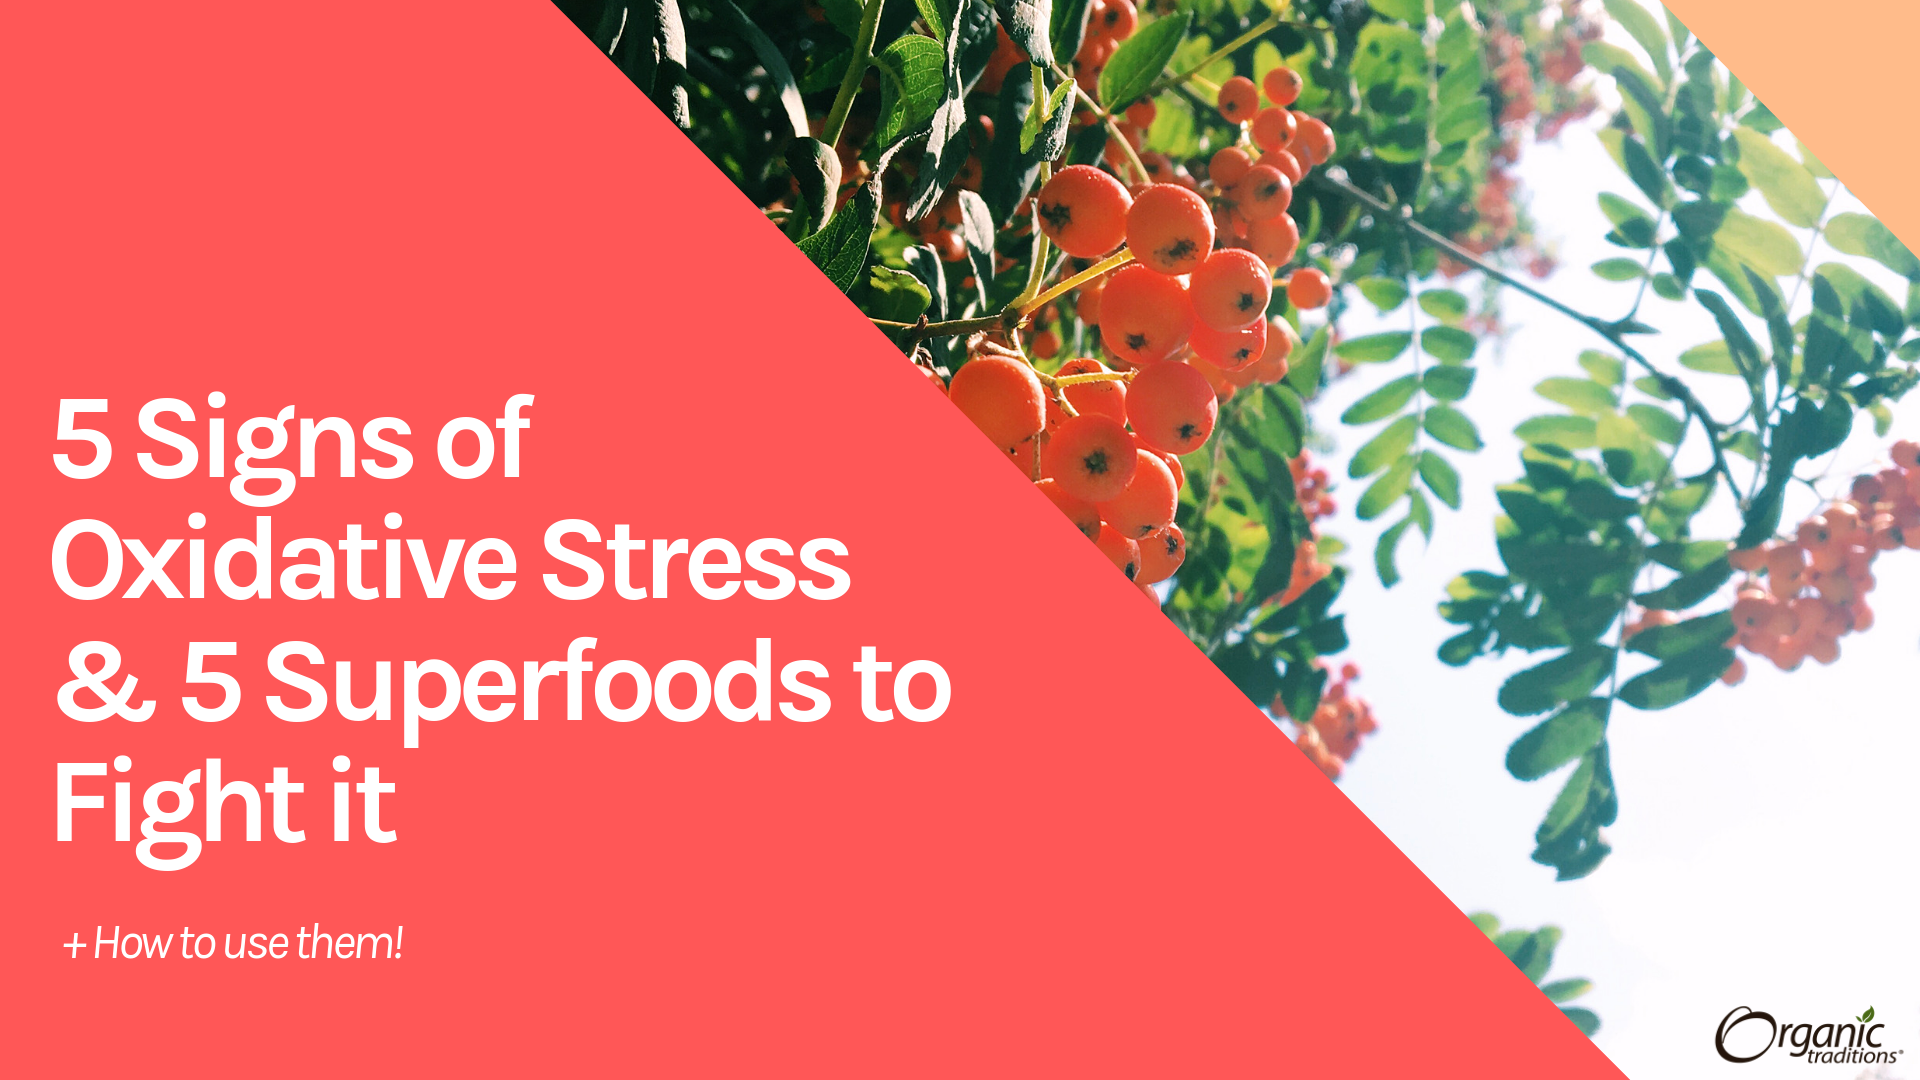 5 Signs of Oxidative Stress & 5 Superfoods to Fight it (+How to Use Them!)